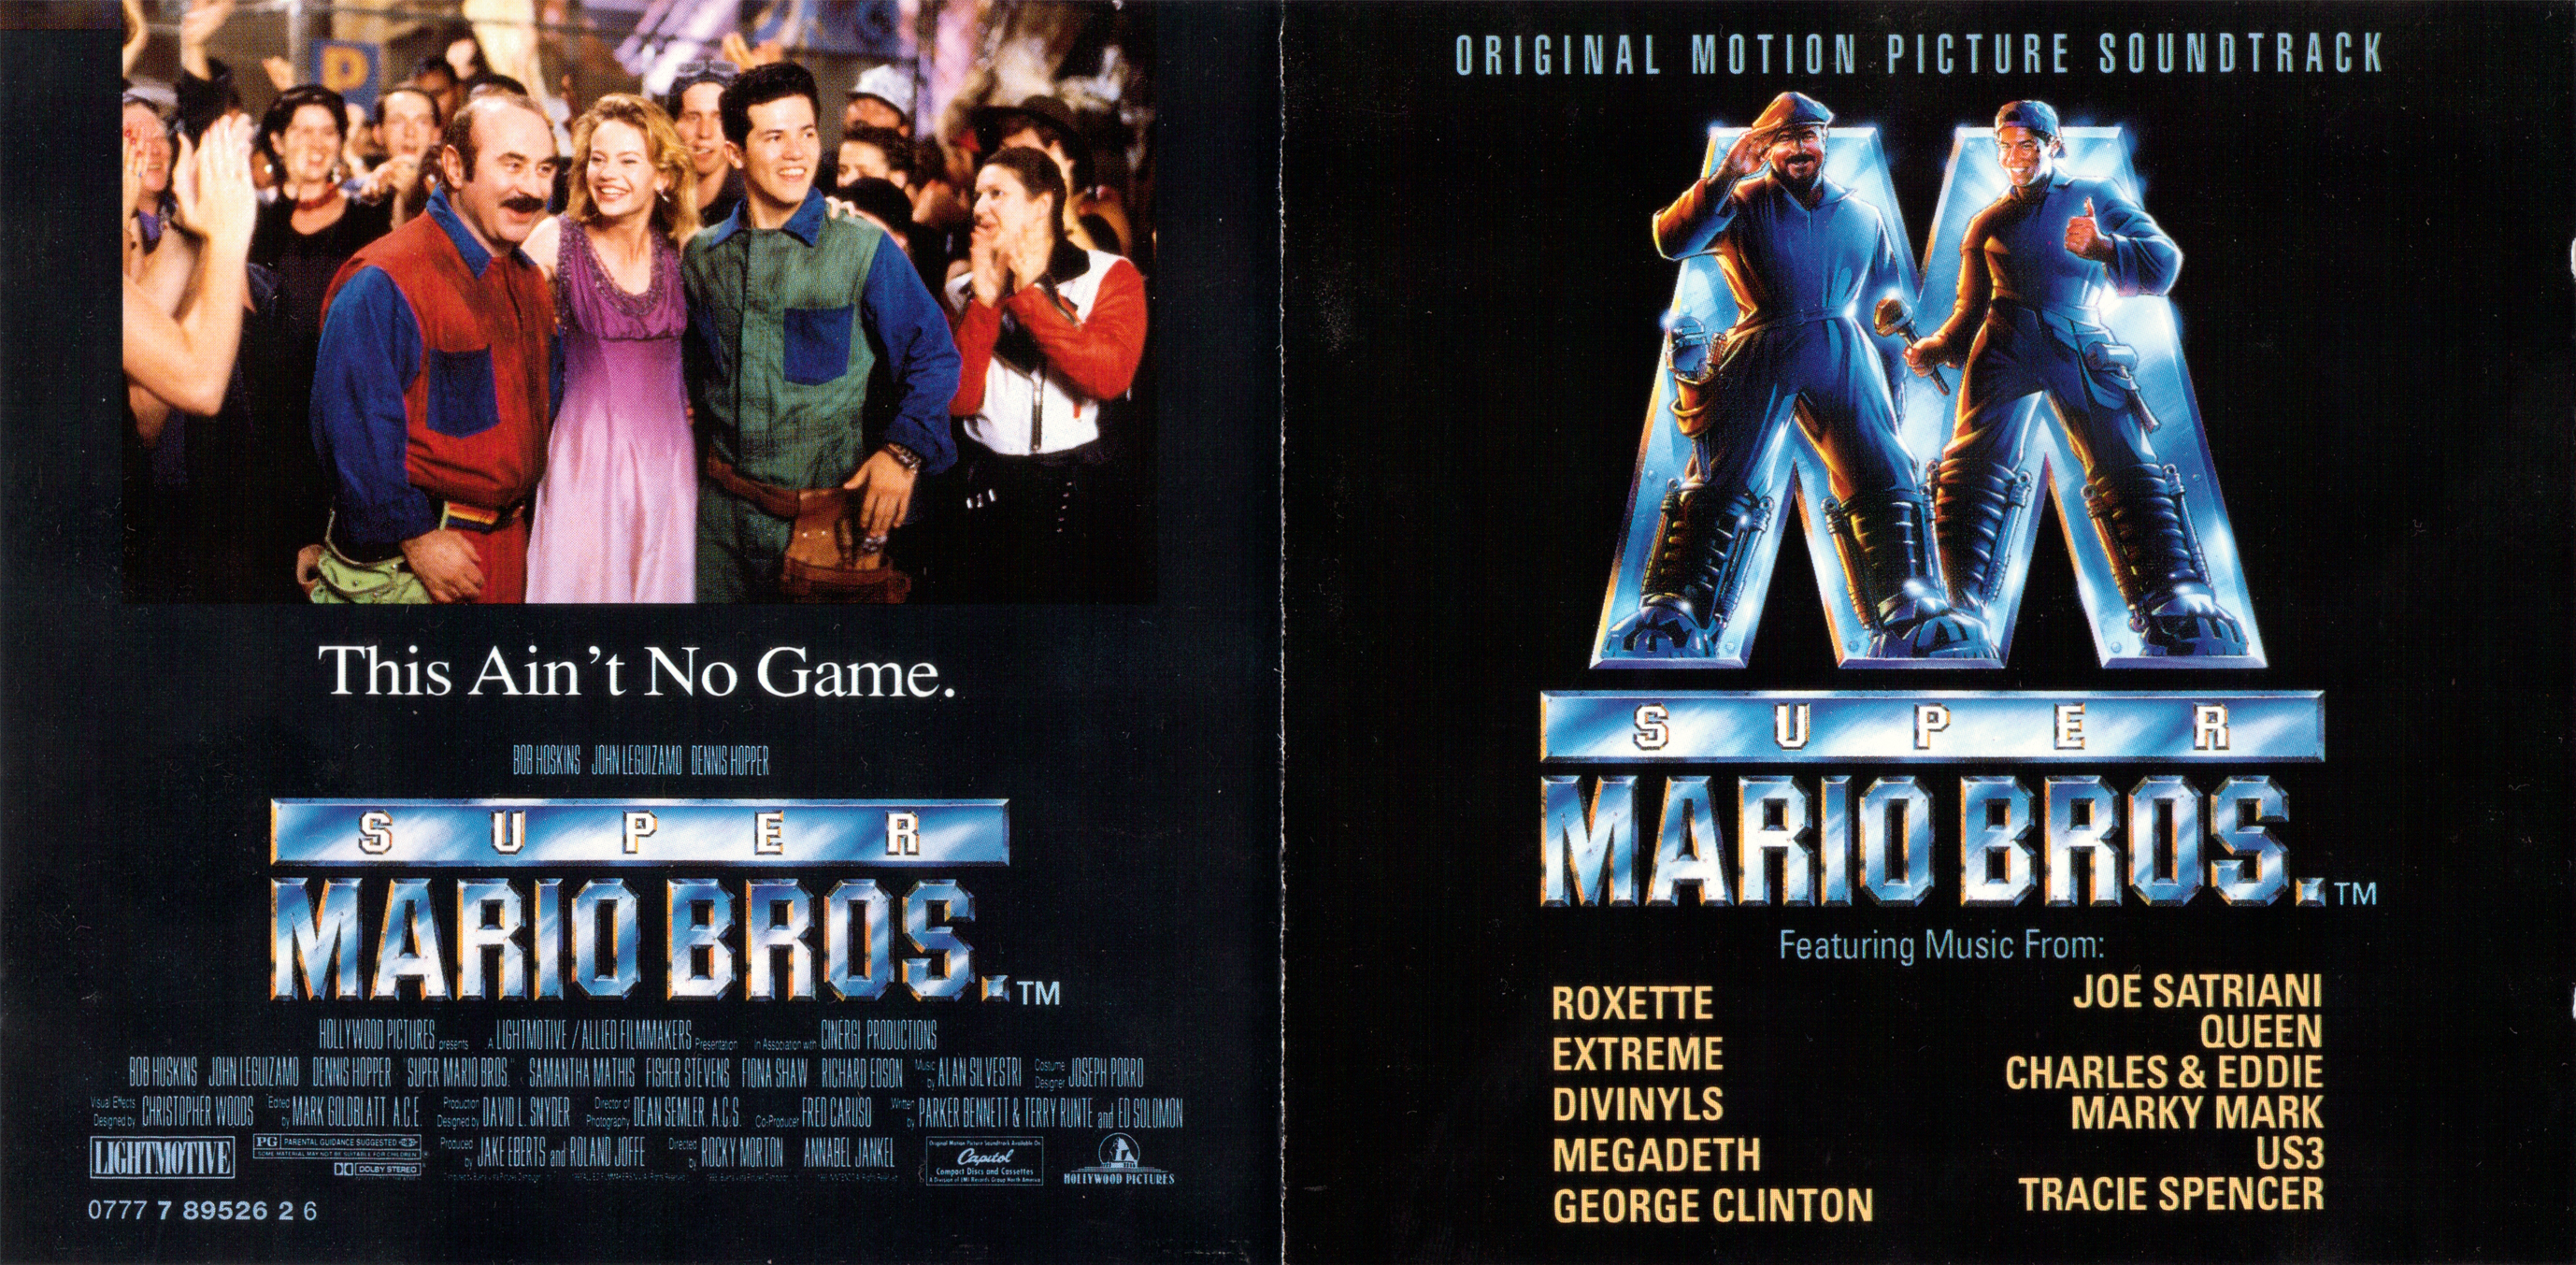 Super Mario Bros Movie soundtrack: List of songs in video game movie